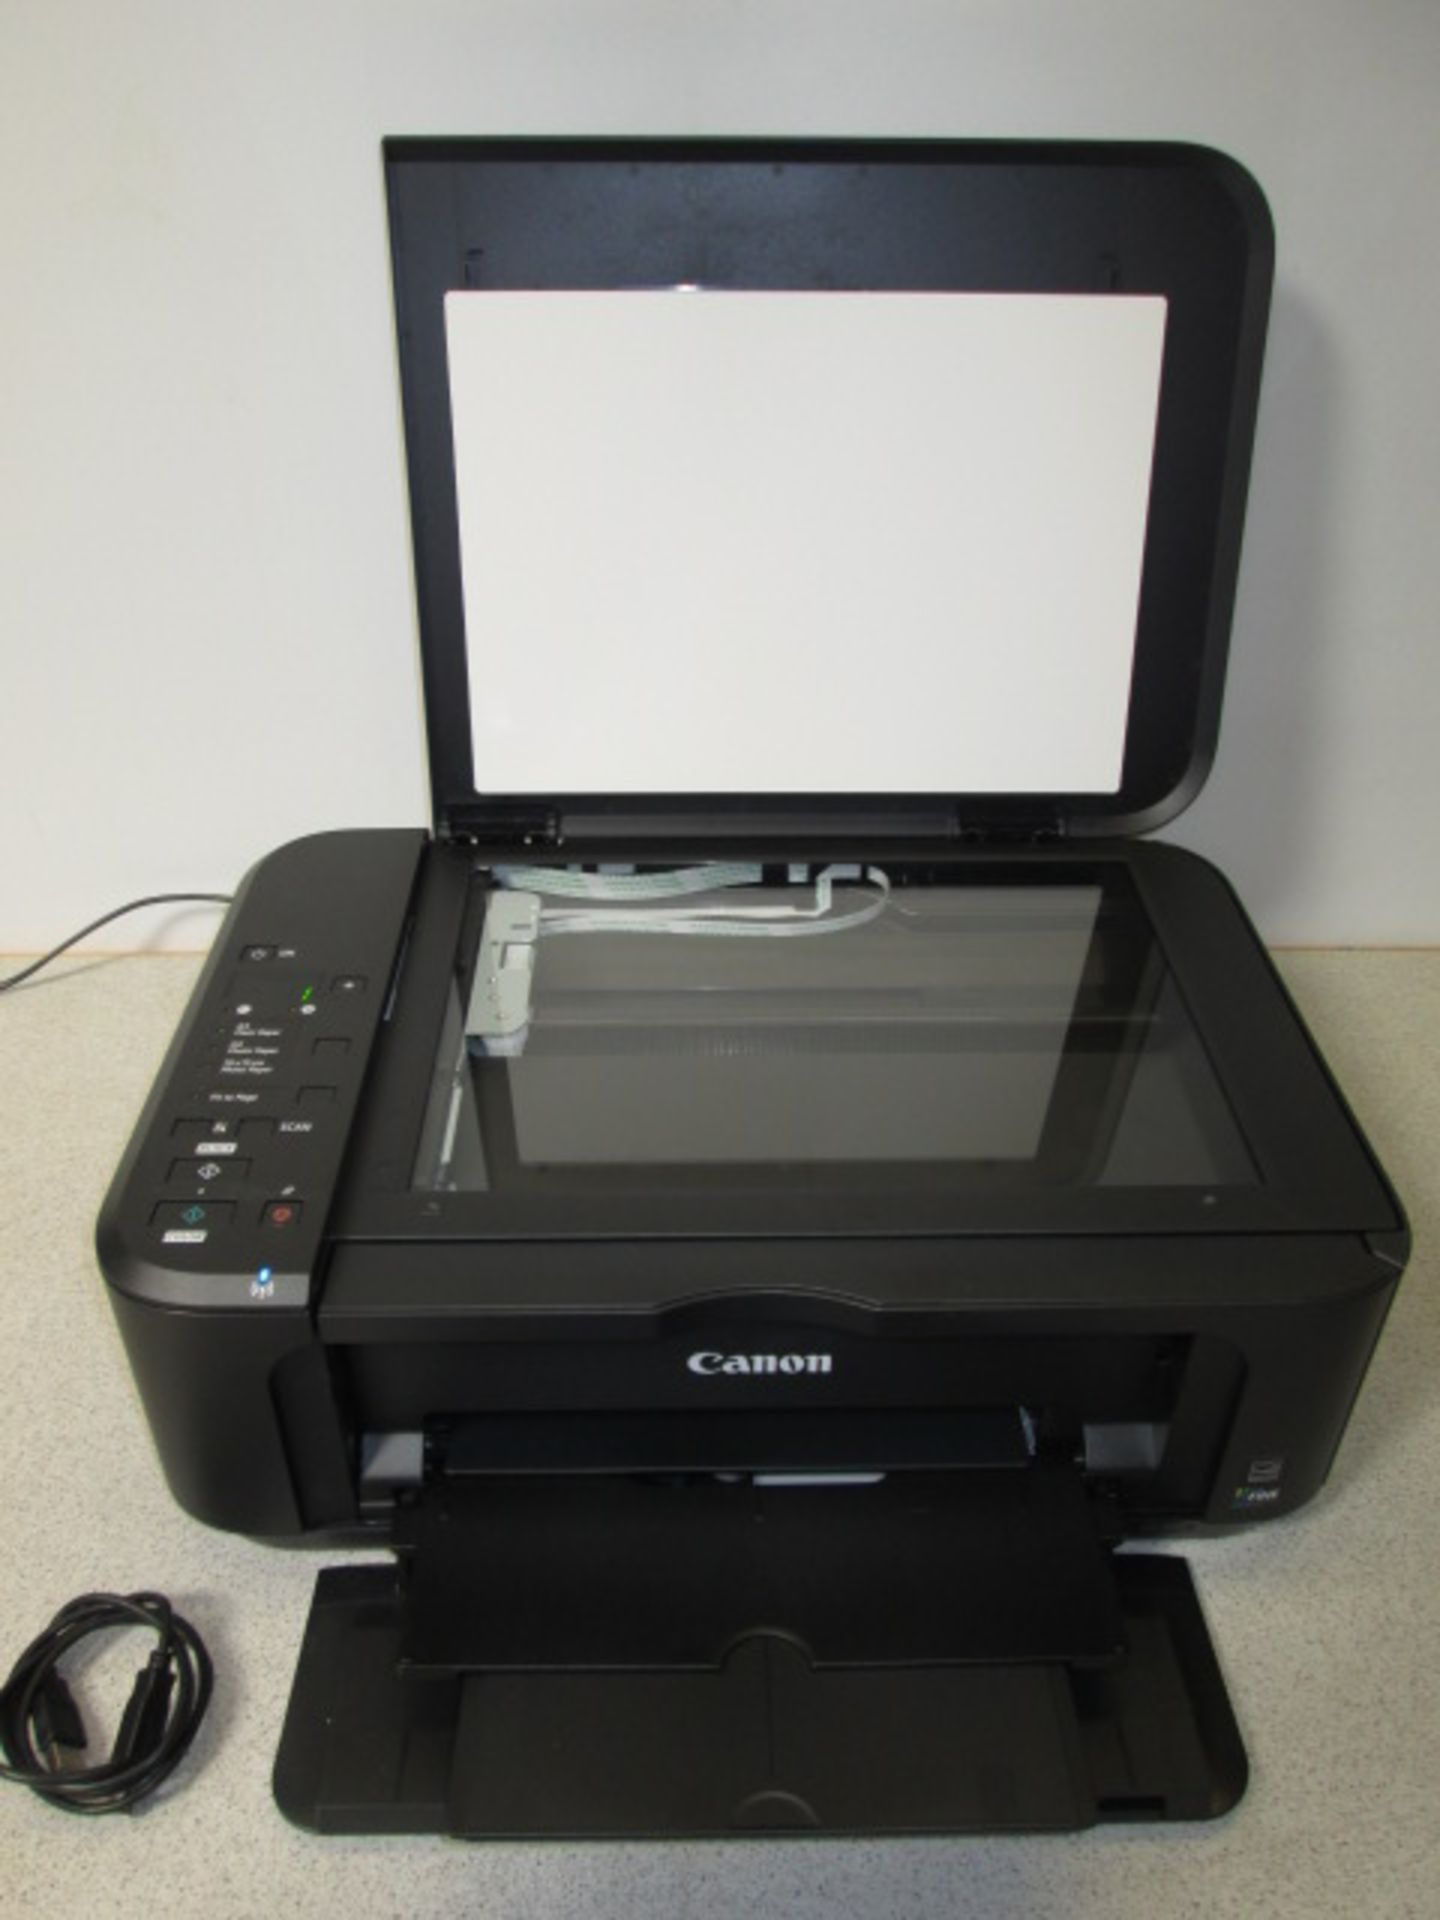 Canon PIXMA MG3250S Inkjet All-In-One Printer with Wi-Fi, Mobile Printing and Auto Duplex. Comes - Image 2 of 3